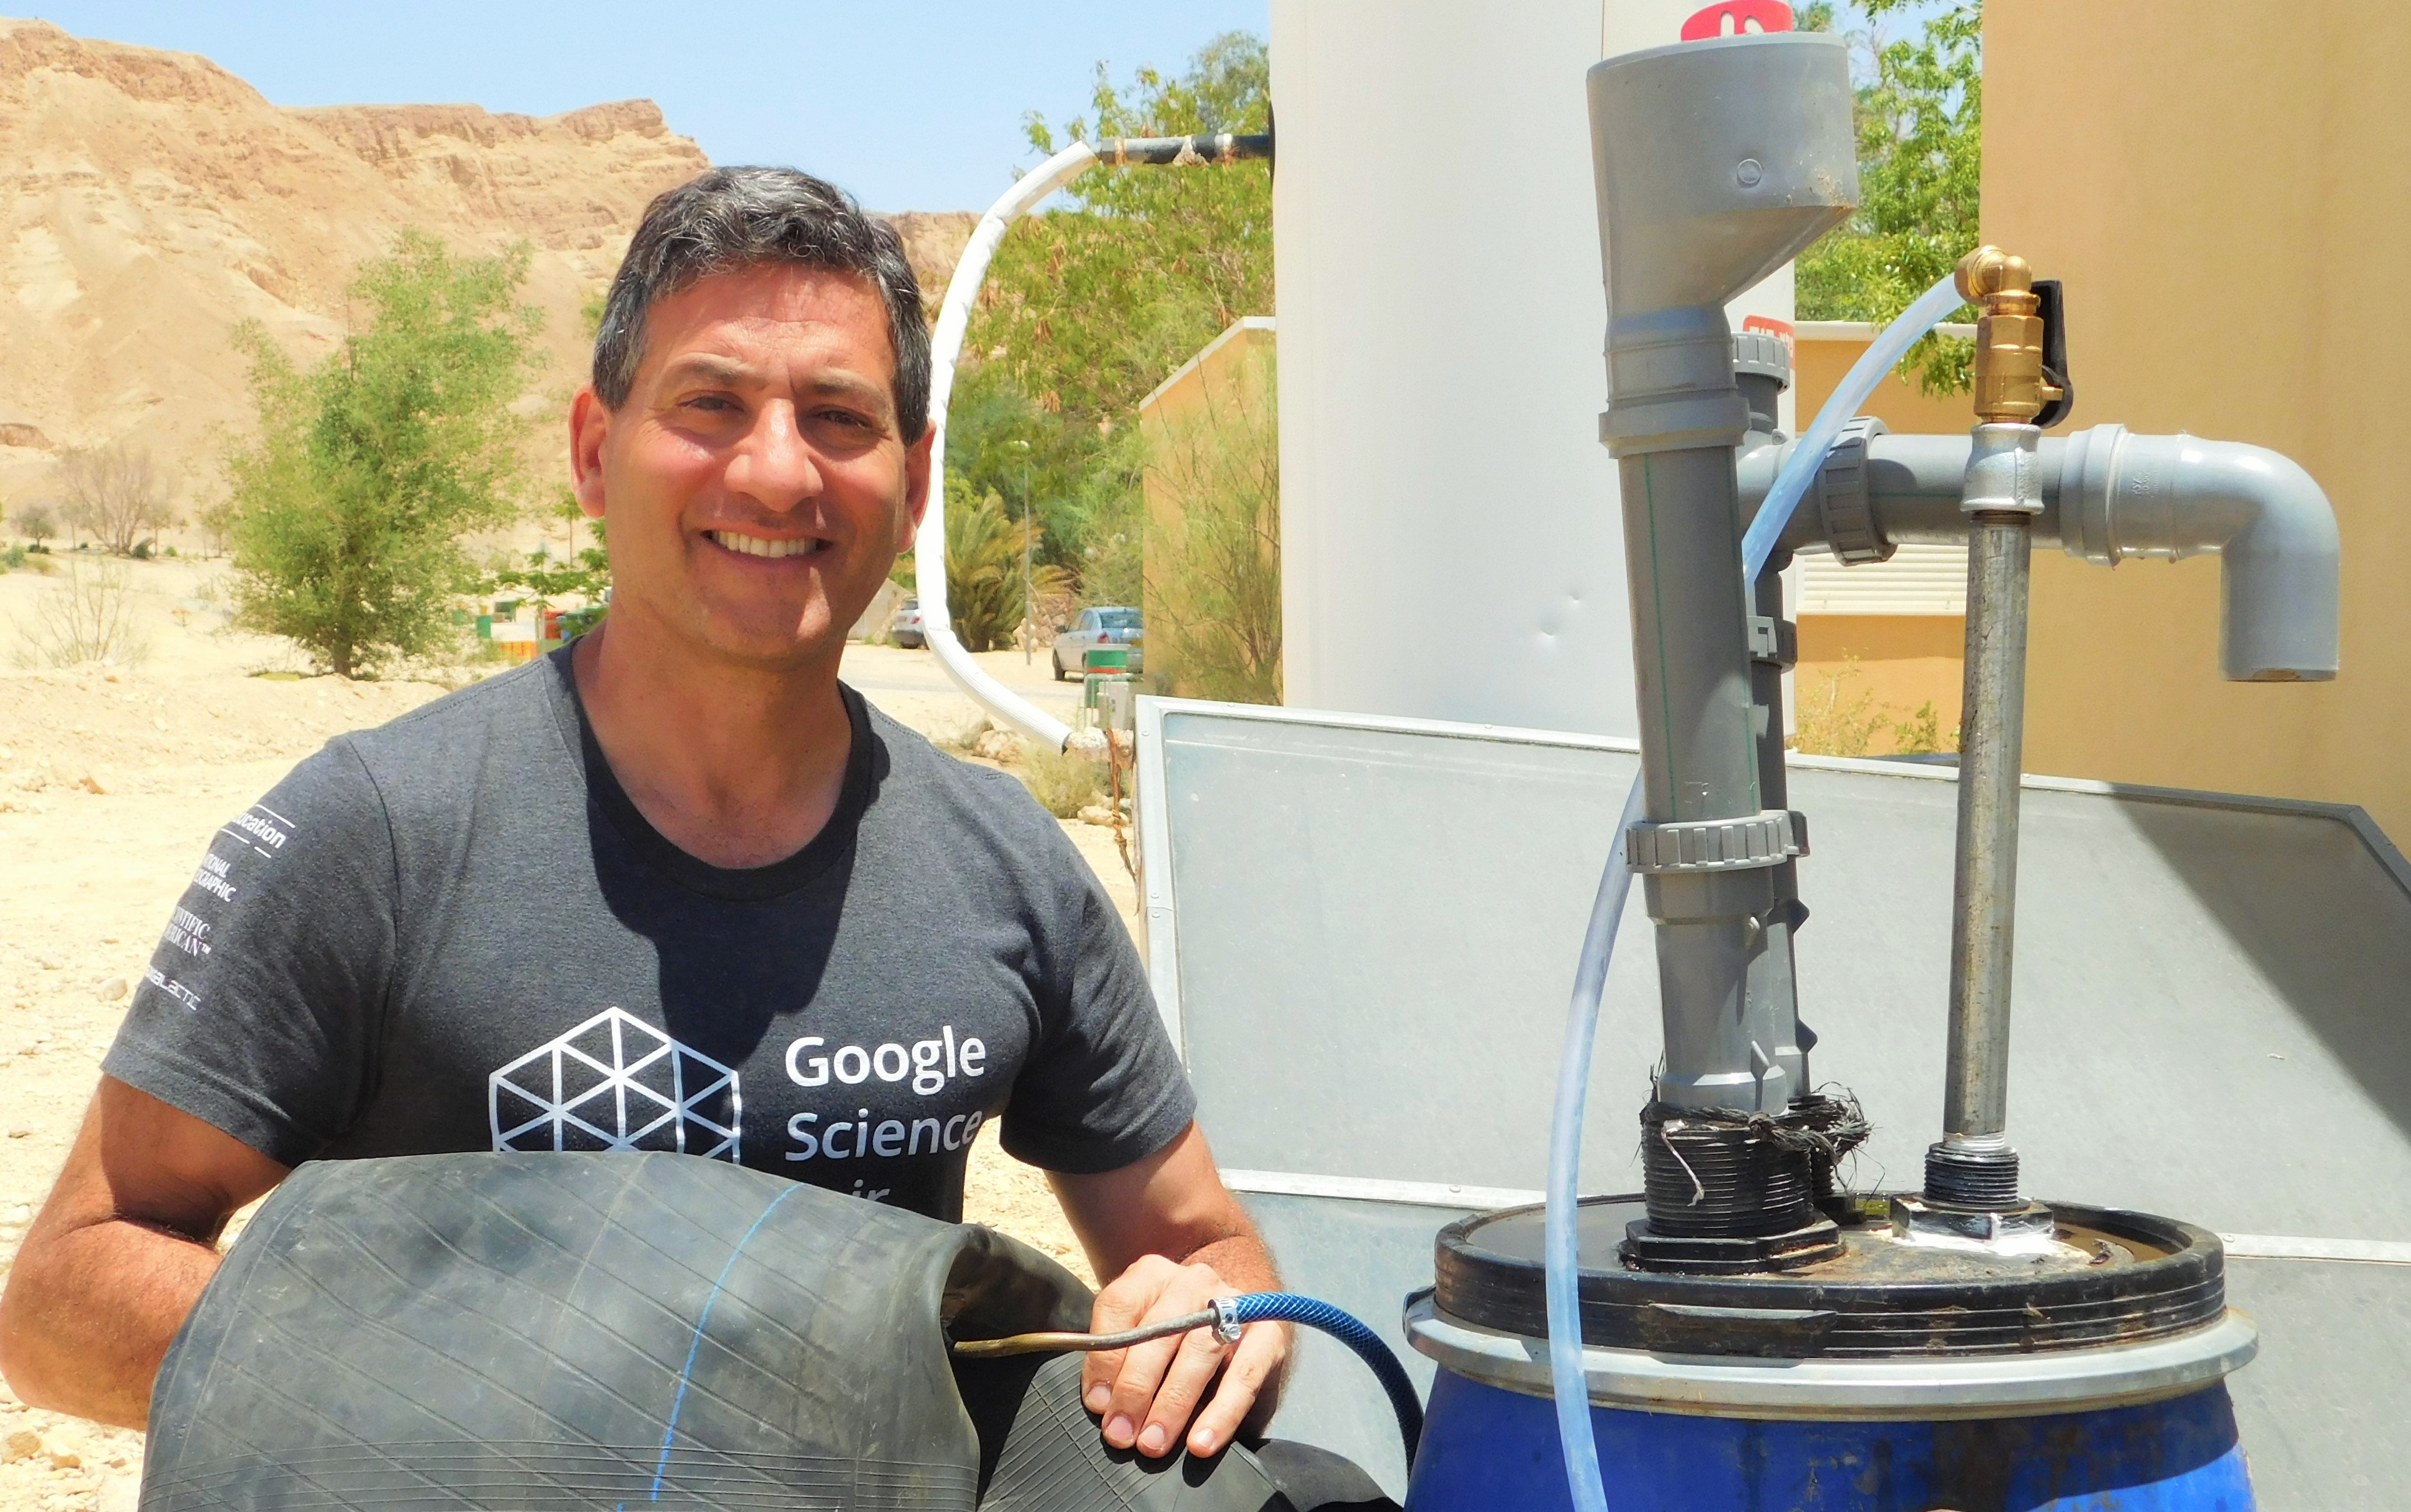 T.H. Culhane, co-founder of Solar CITIES, at Arava Institute in Israel with Pickel Barrel Biodigester